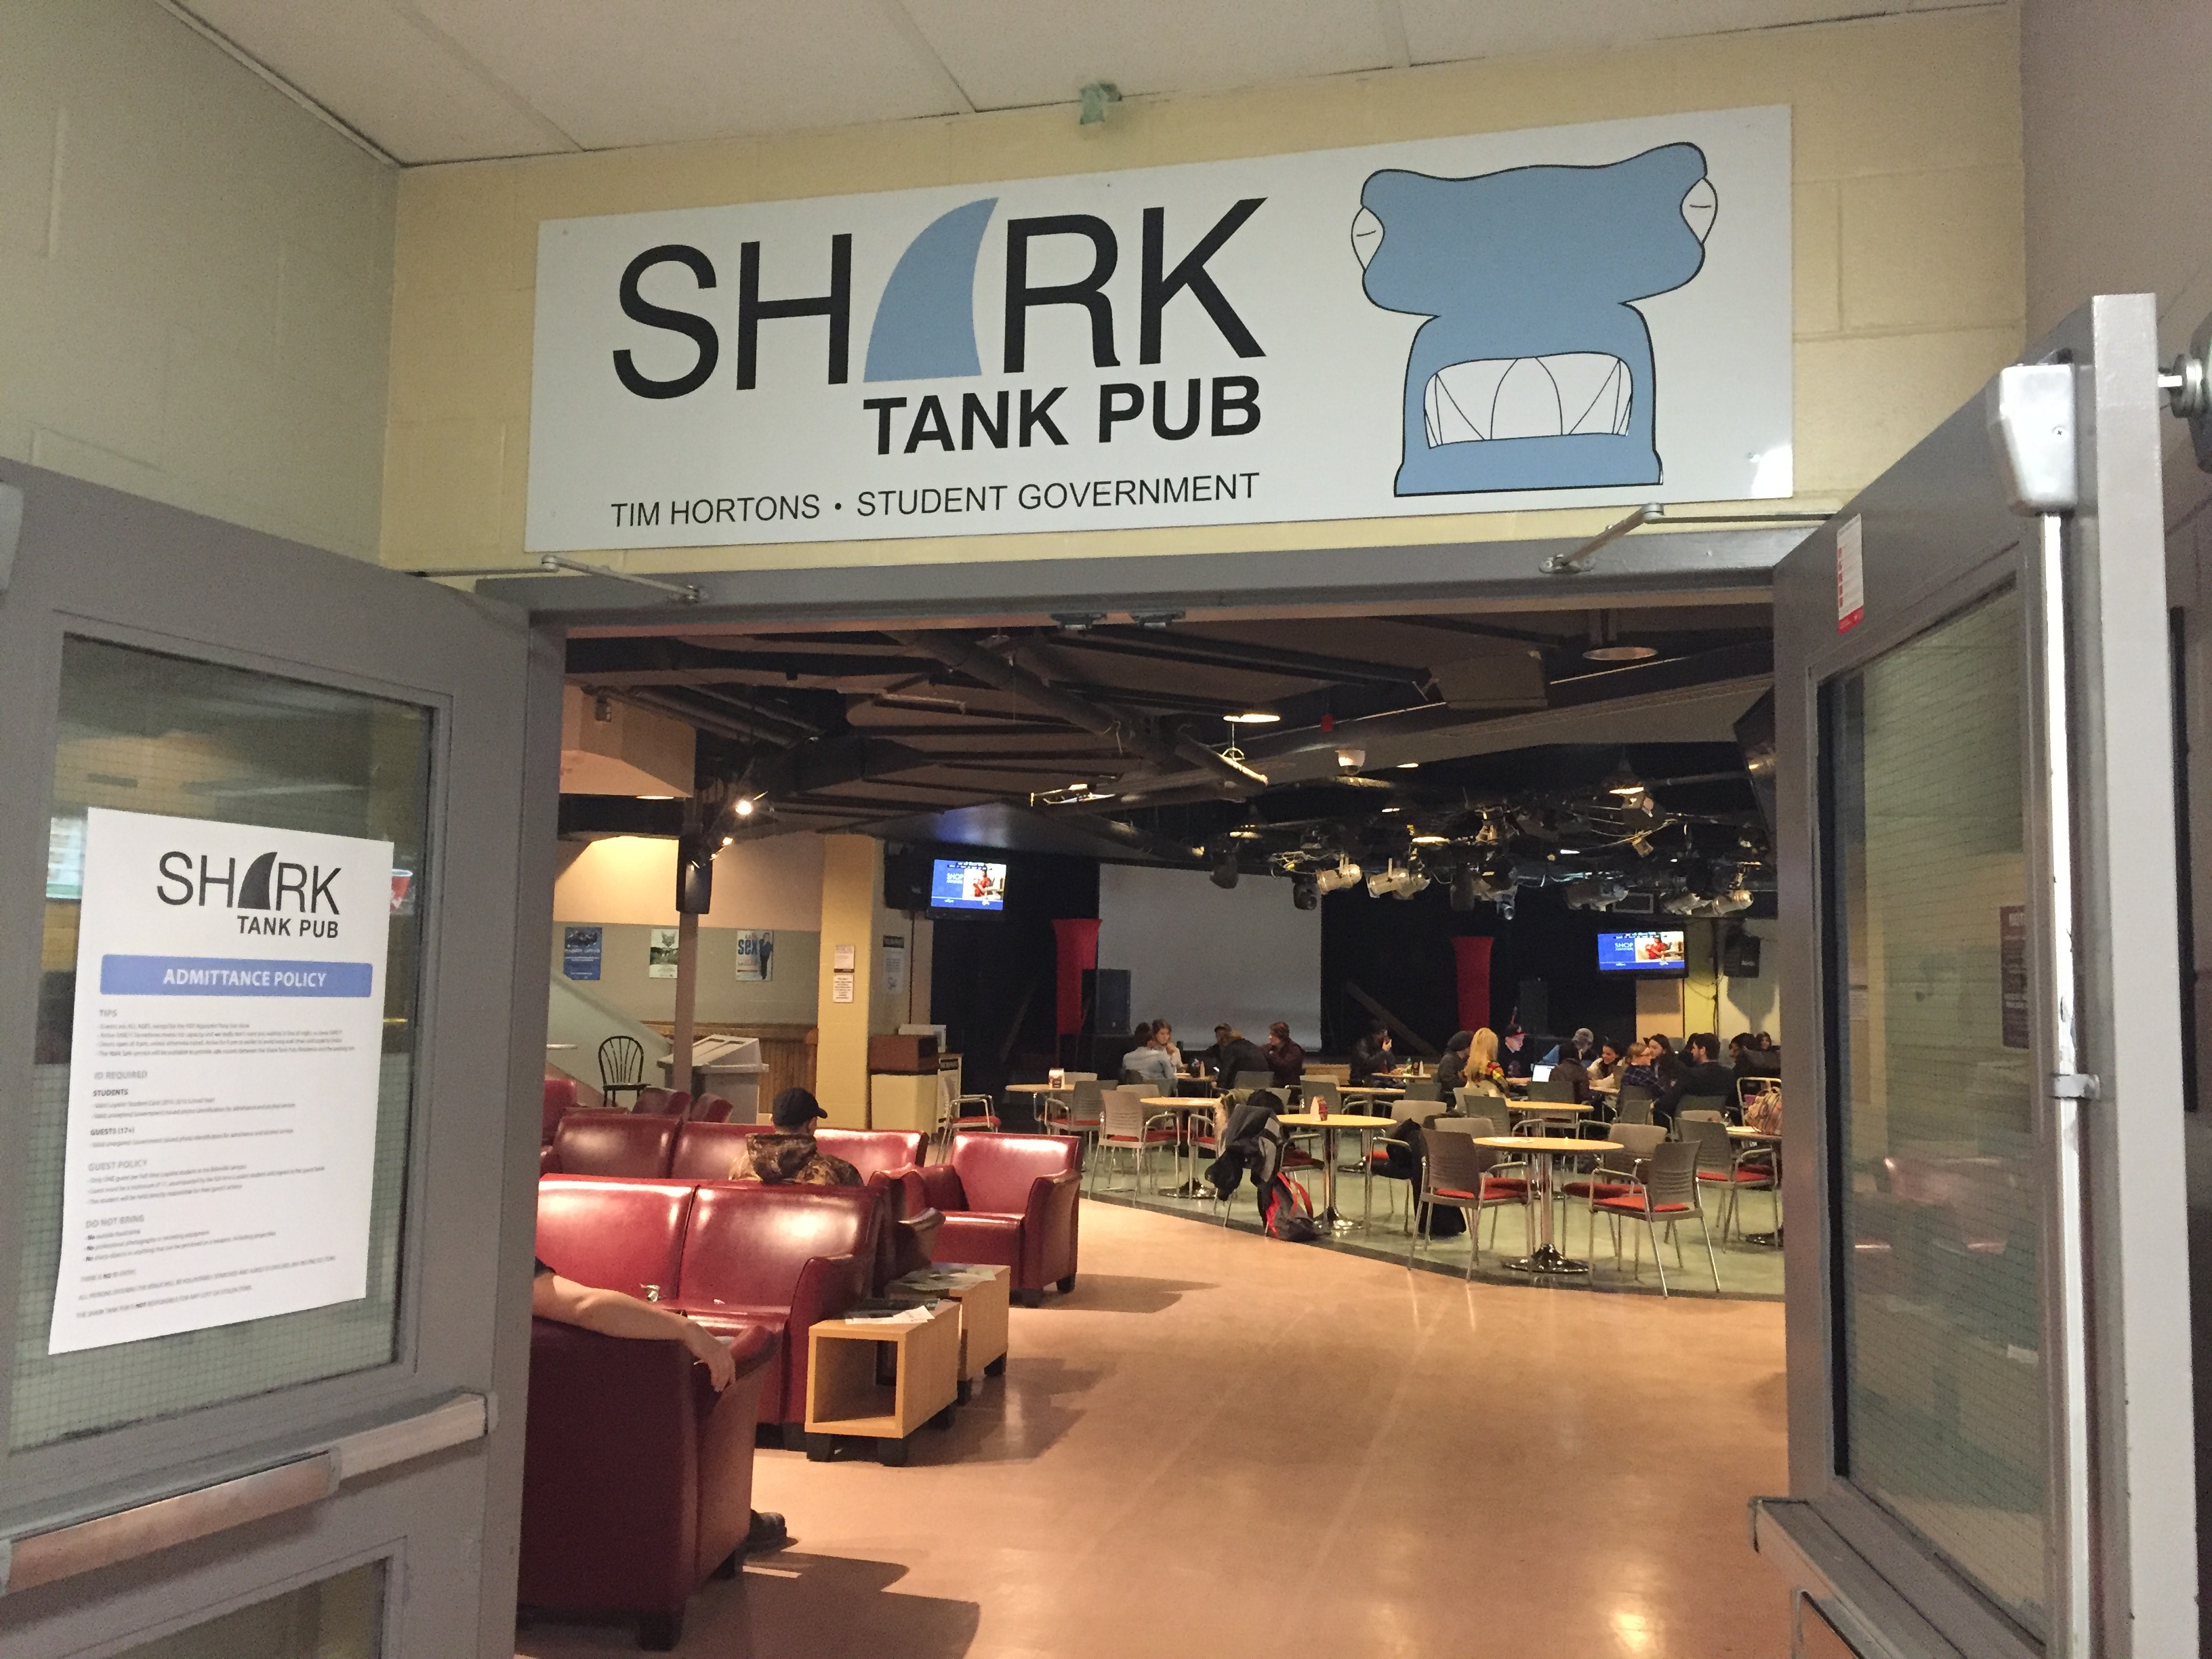 Loyalist College students have said they'd like to see the Shark Tank Pub open on weekends. Photo credit Deanna Fraser.